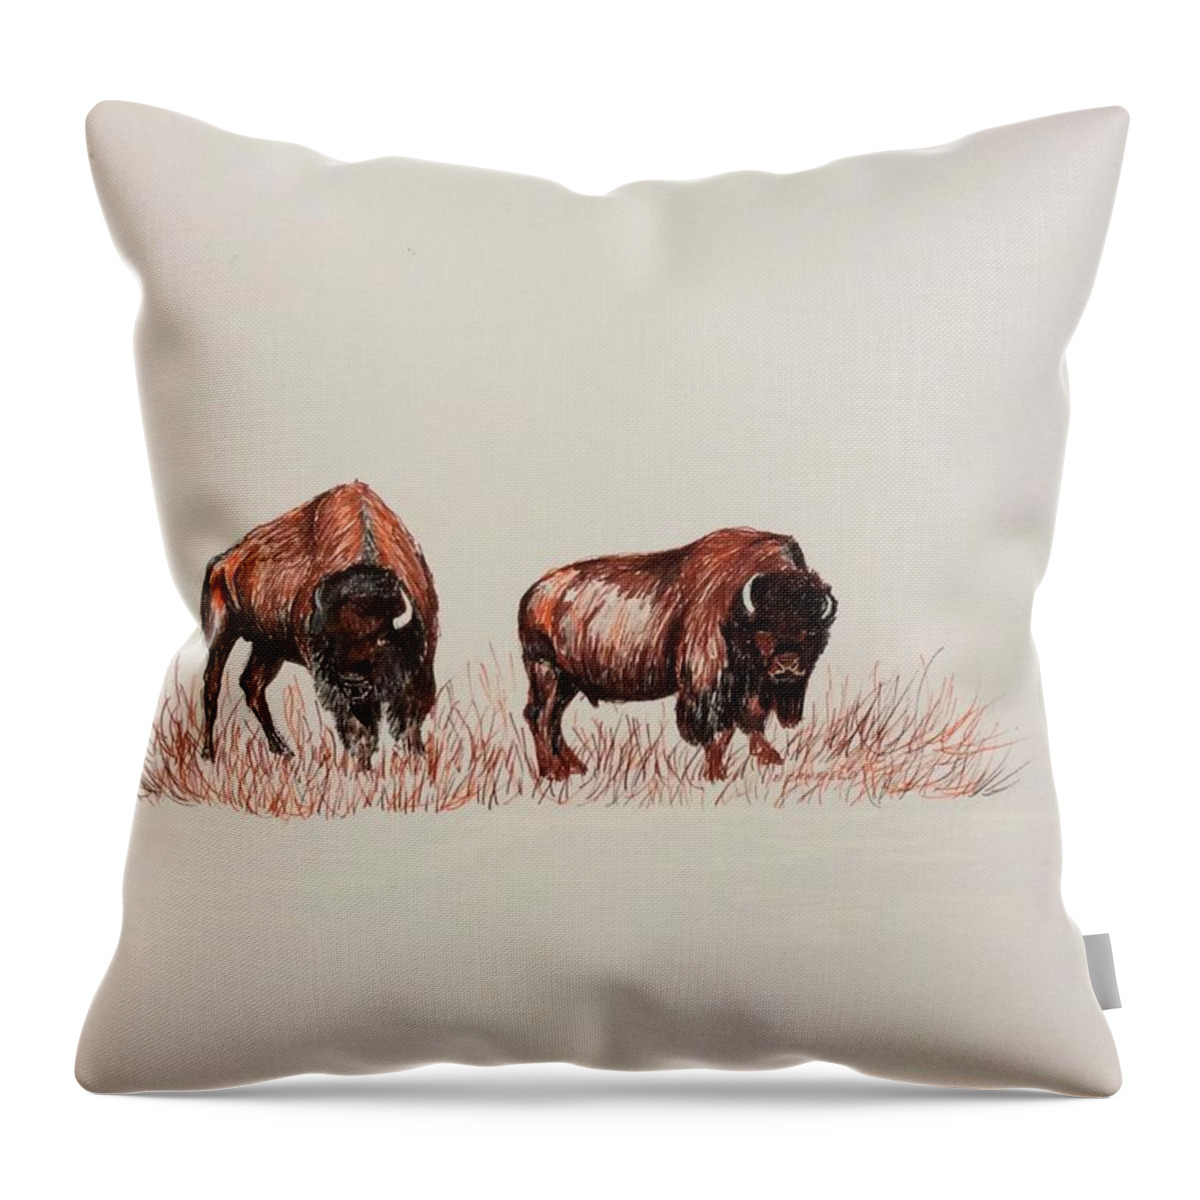 Bison Throw Pillow featuring the drawing Two Grumpy Bisons by Ellen Canfield